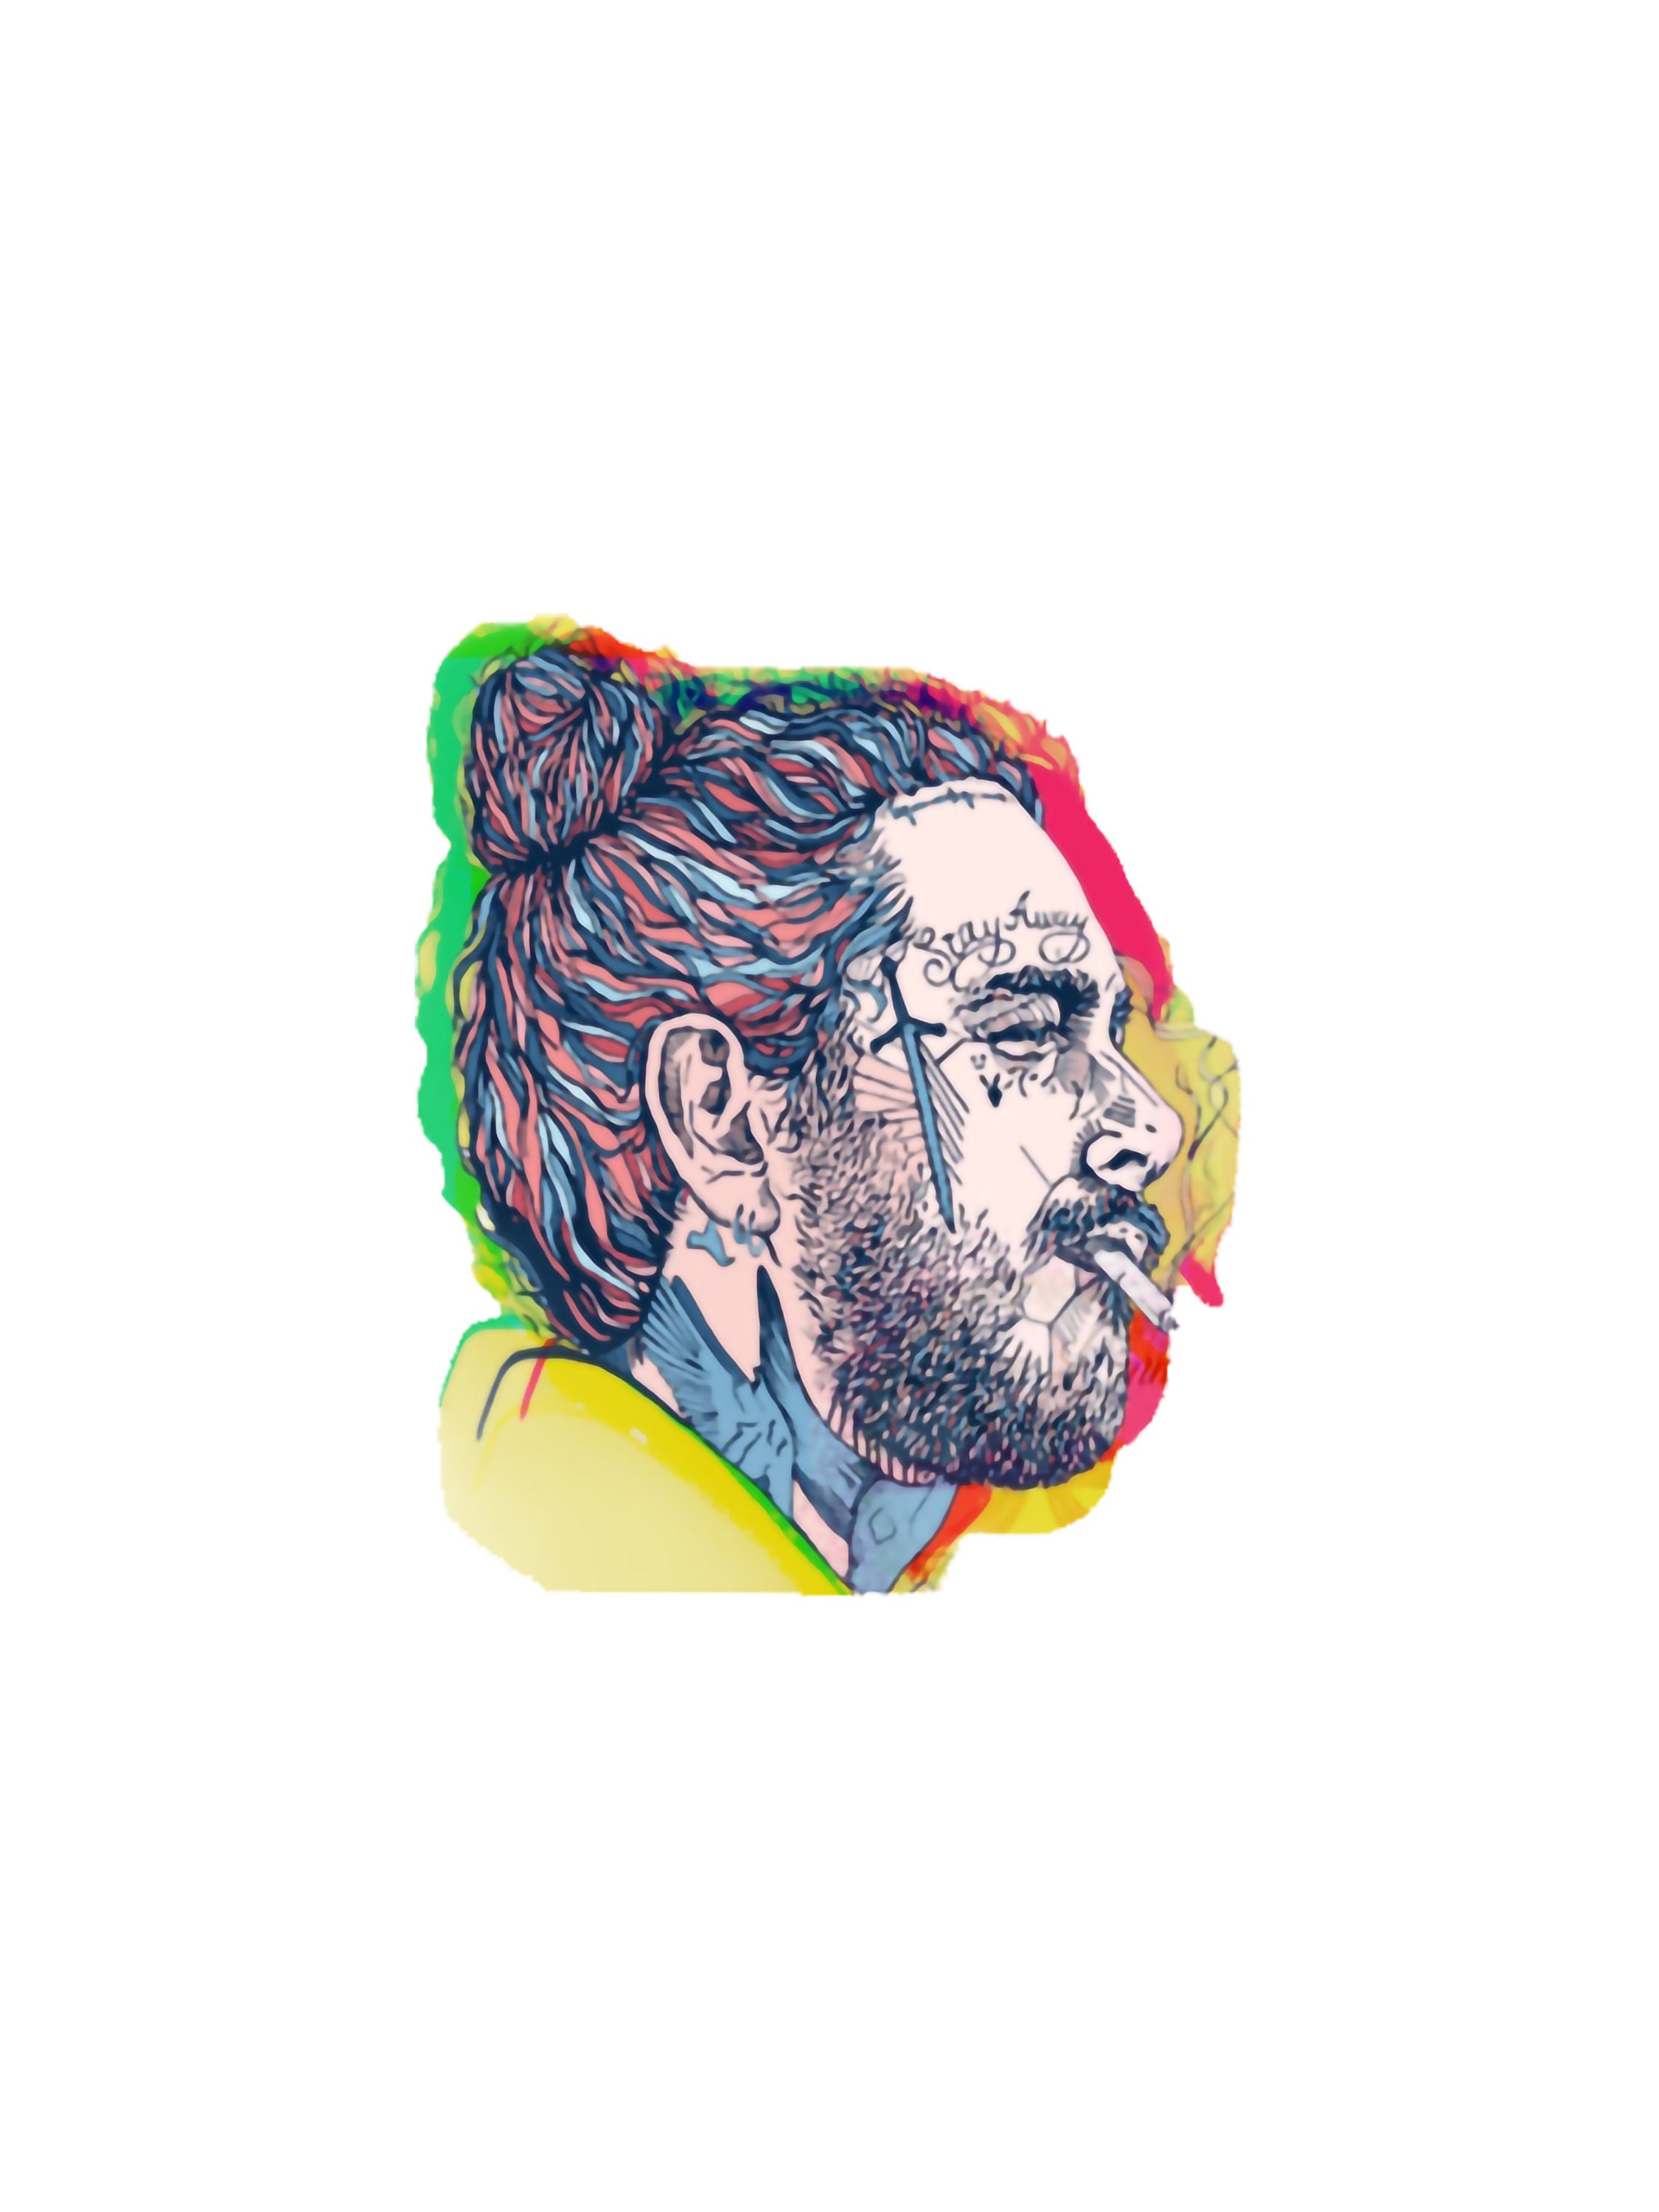 Post Malone Stickers | Etsy